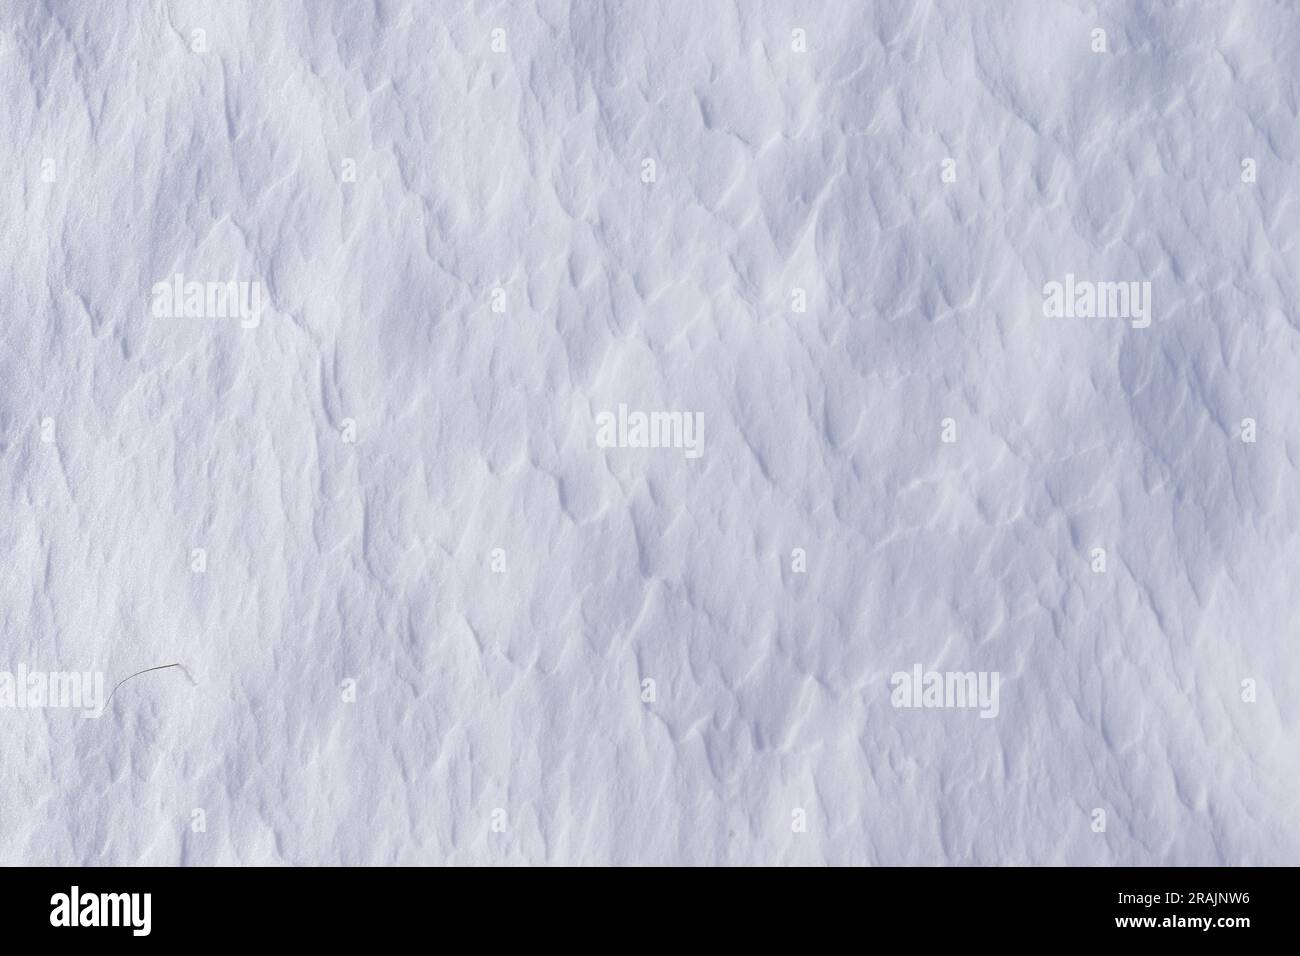 Patterns on the snow. Background. Texture. Stock Photo